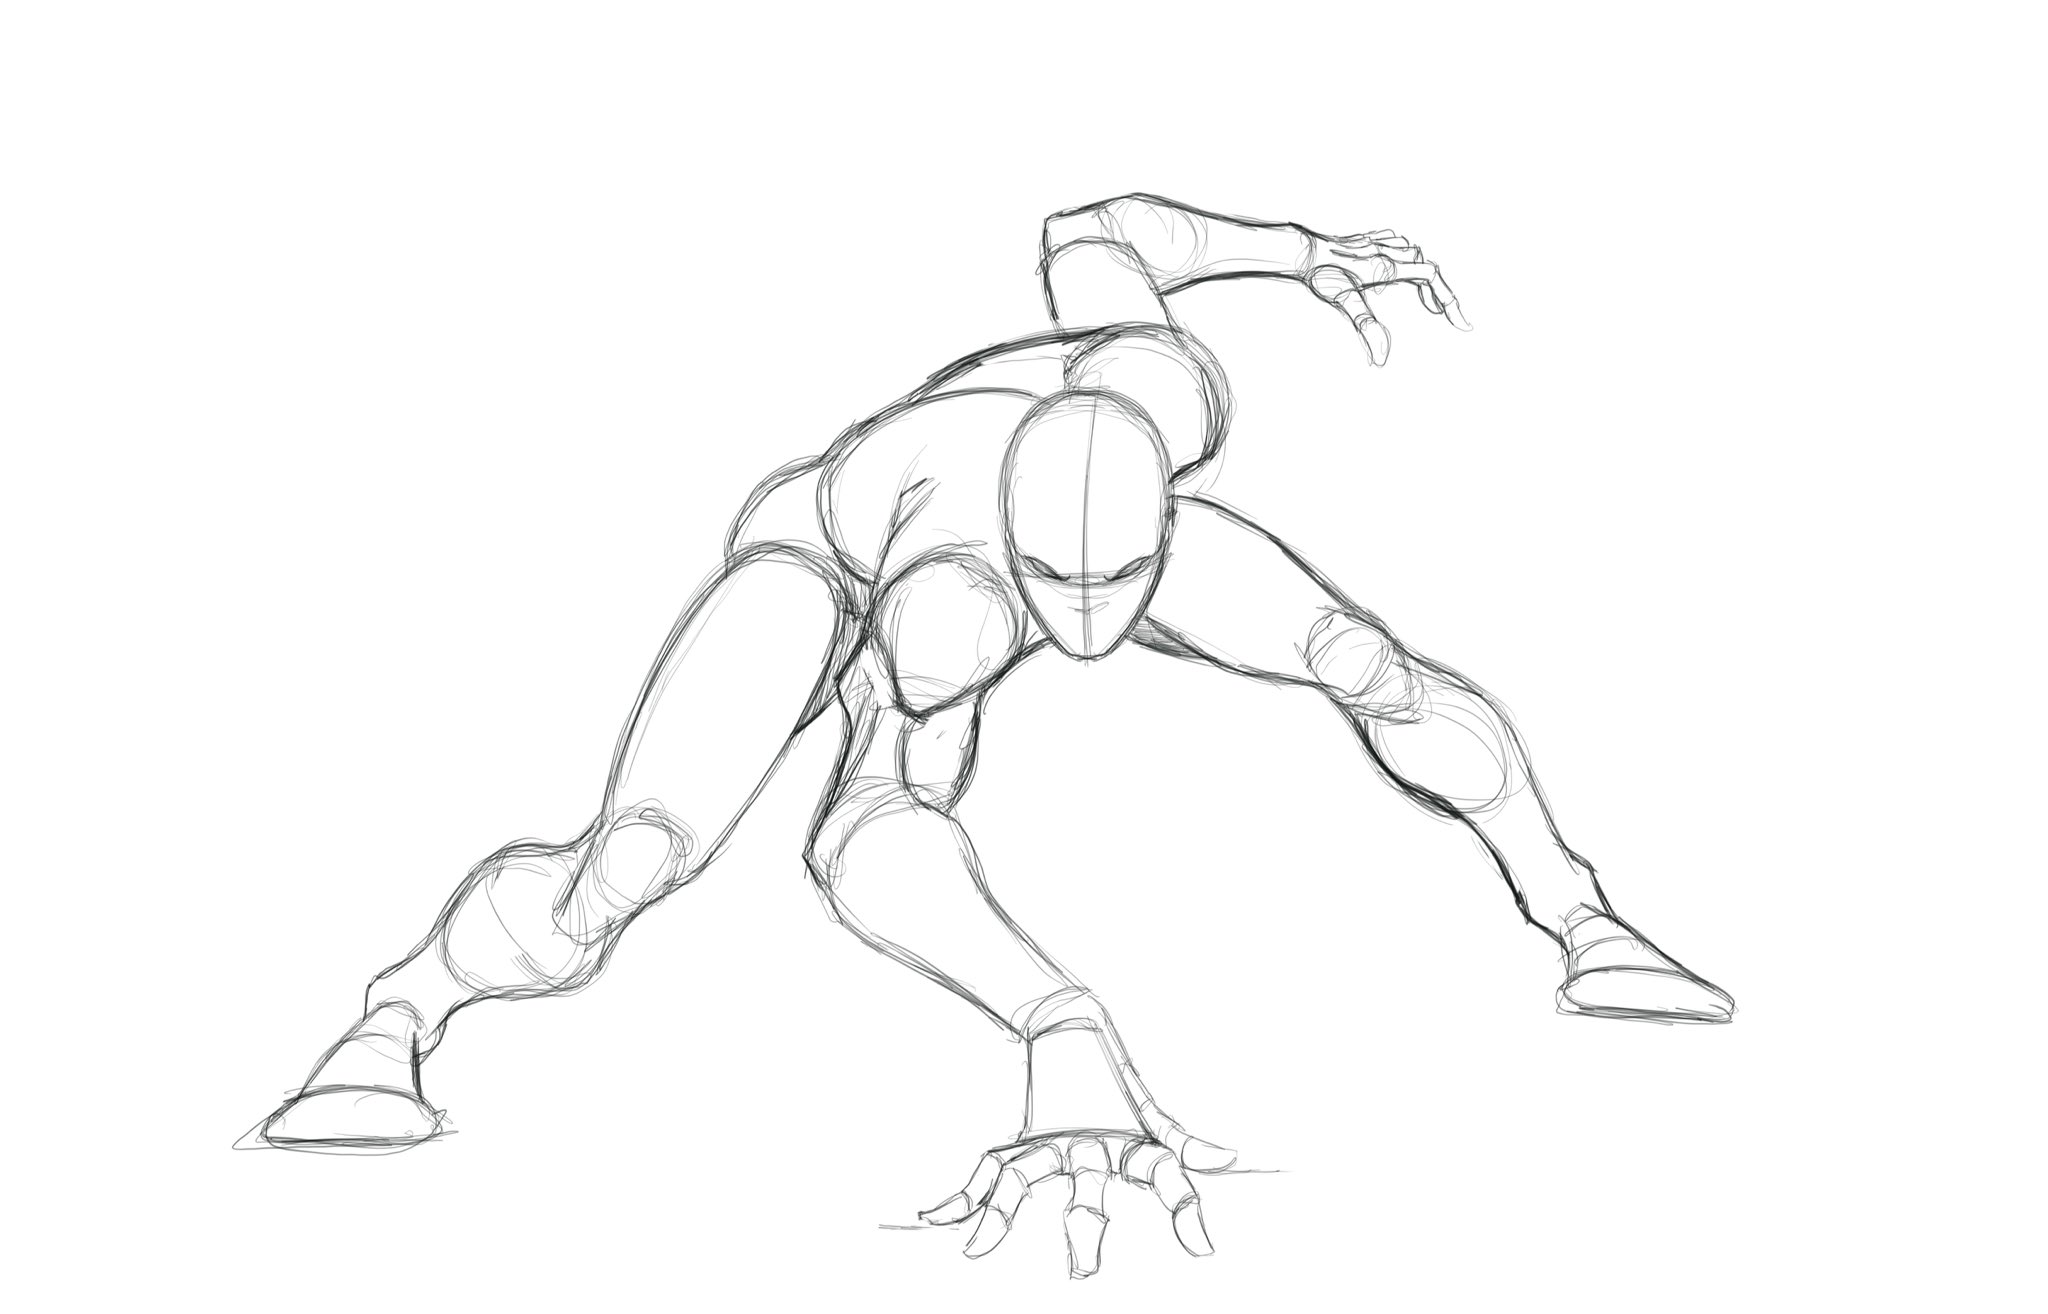 Here's a Spider-Man action pose I did today. I just need to add the details  then I can ink and color it : r/sketches